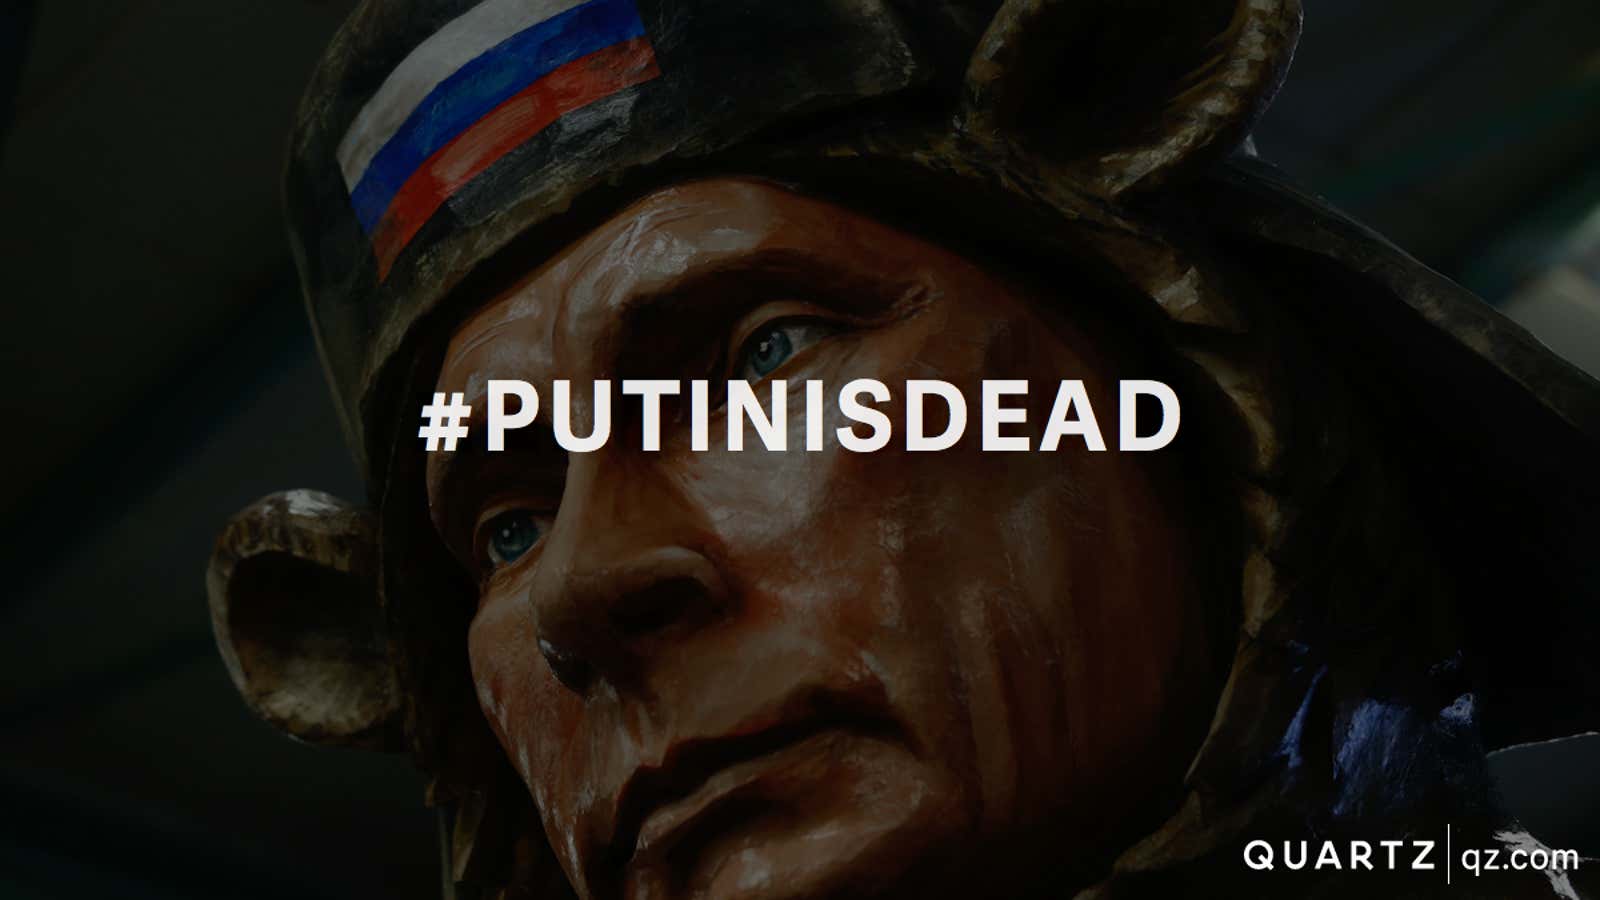 Putin is still alive, despite tweets to the contrary